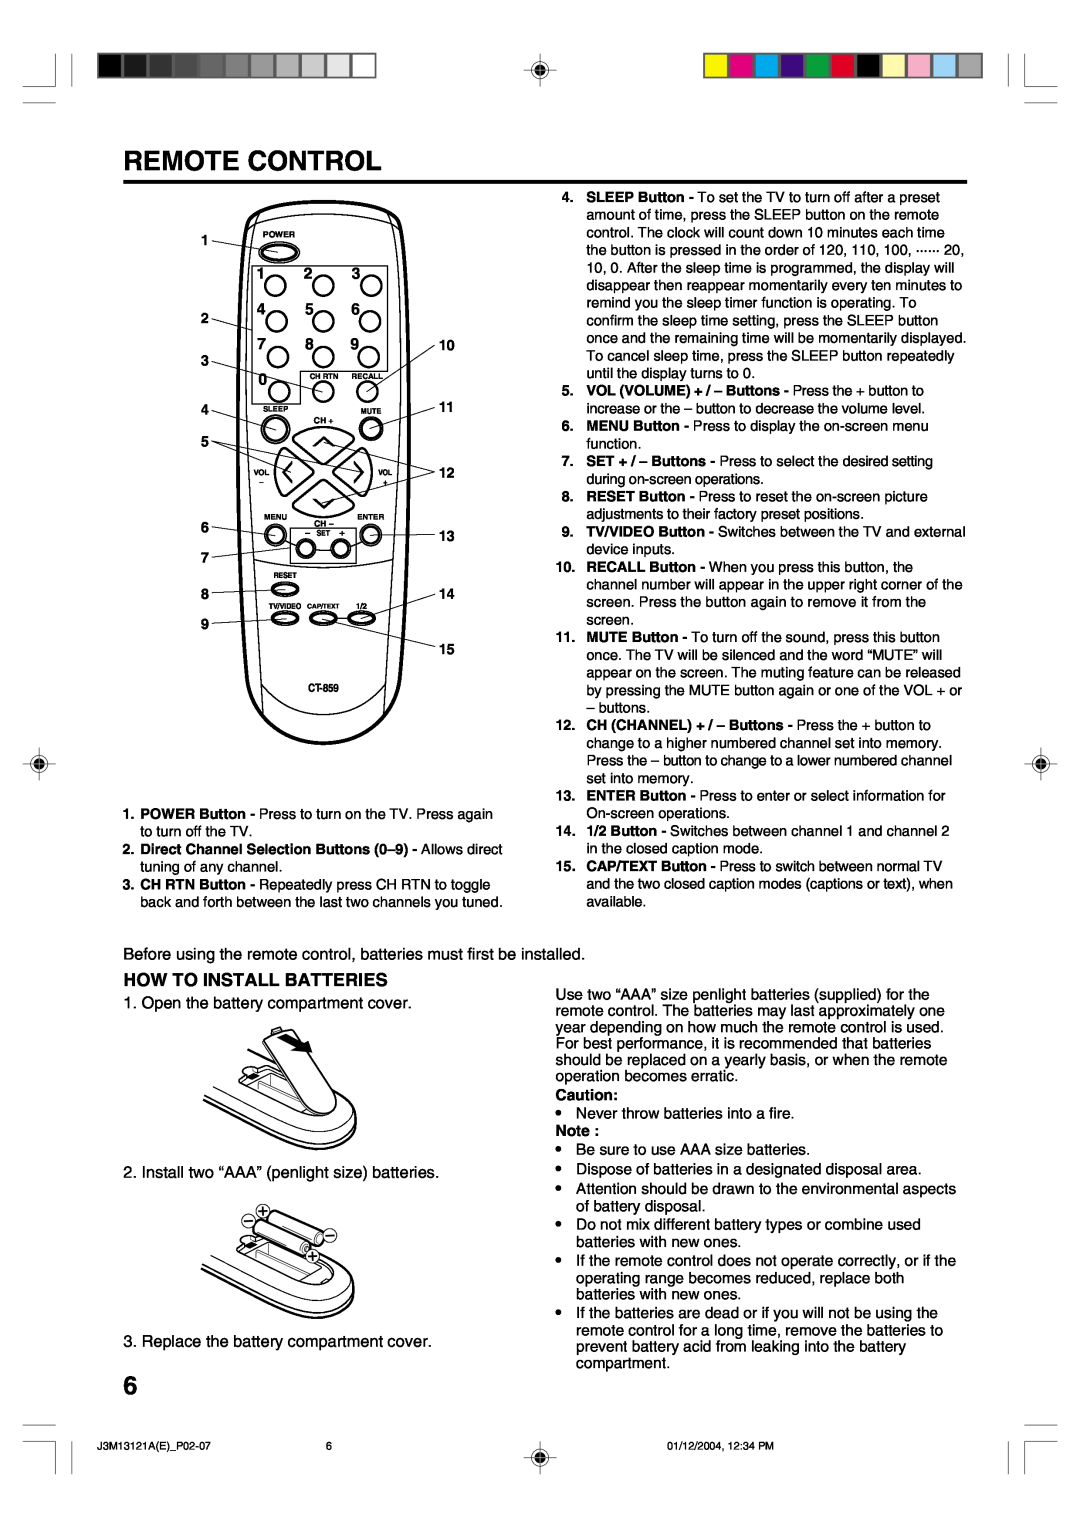 Toshiba 13A25 Remote Control, How To Install Batteries, Before using the remote control, batteries must first be installed 